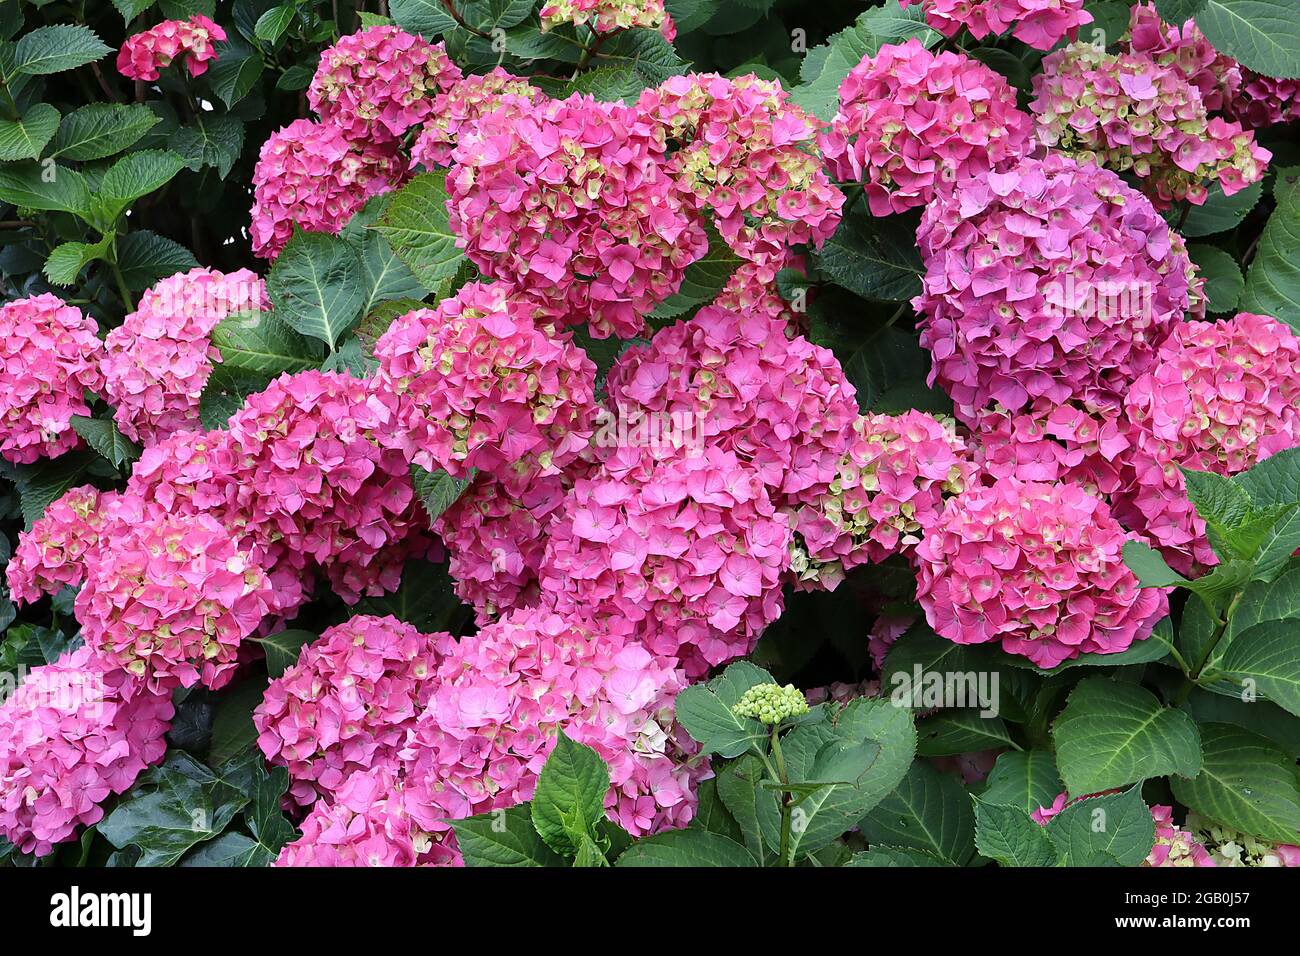 Hydrangea macrophylla ‘Forever Pink’ Hortensia Forever Pink - large flower heads of deep pink flowers, June, England, UK Stock Photo